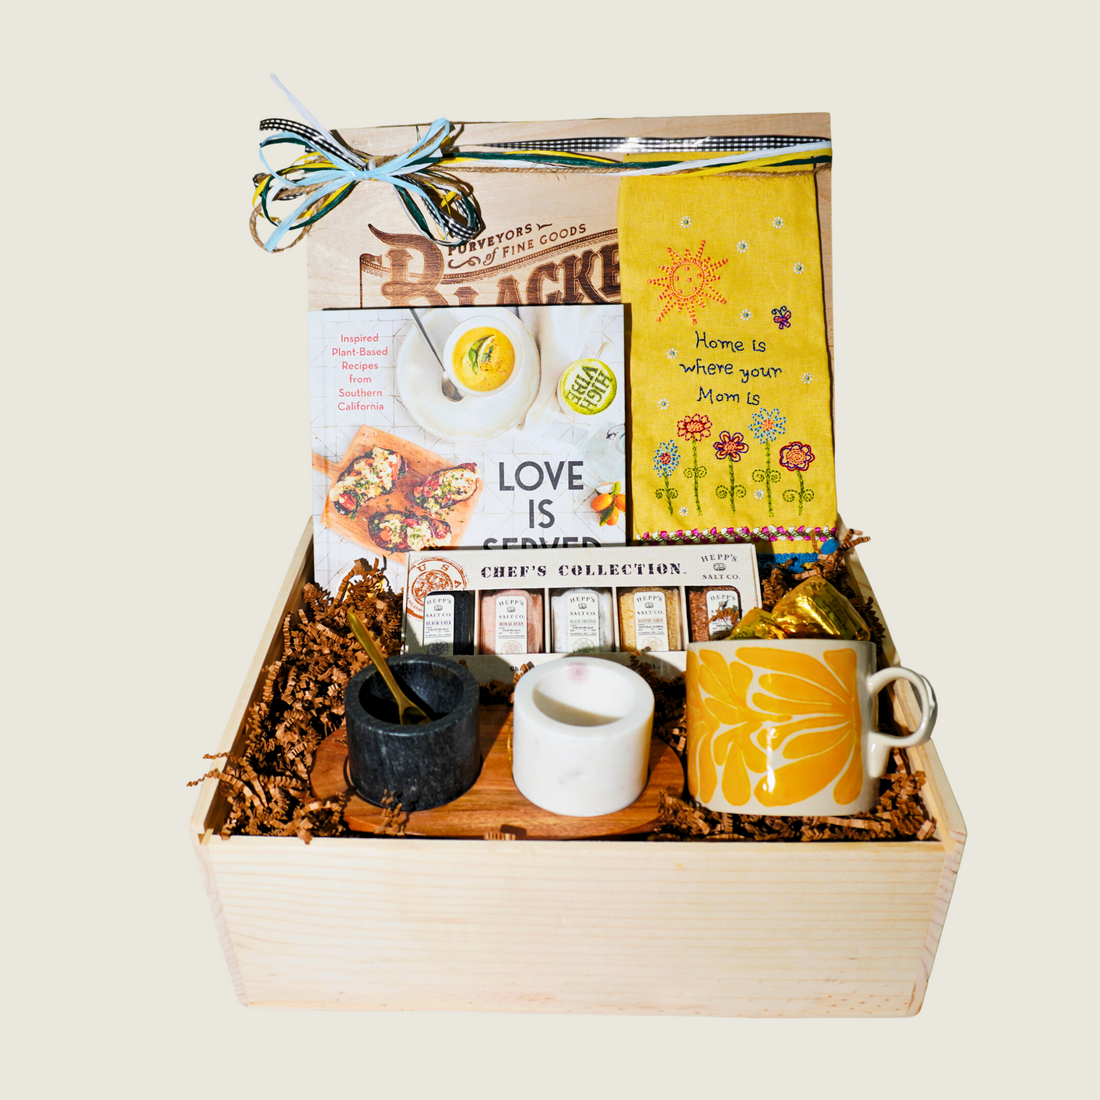 Love is Served Gift Box - NEED TO PRICE - Blackbird General Store